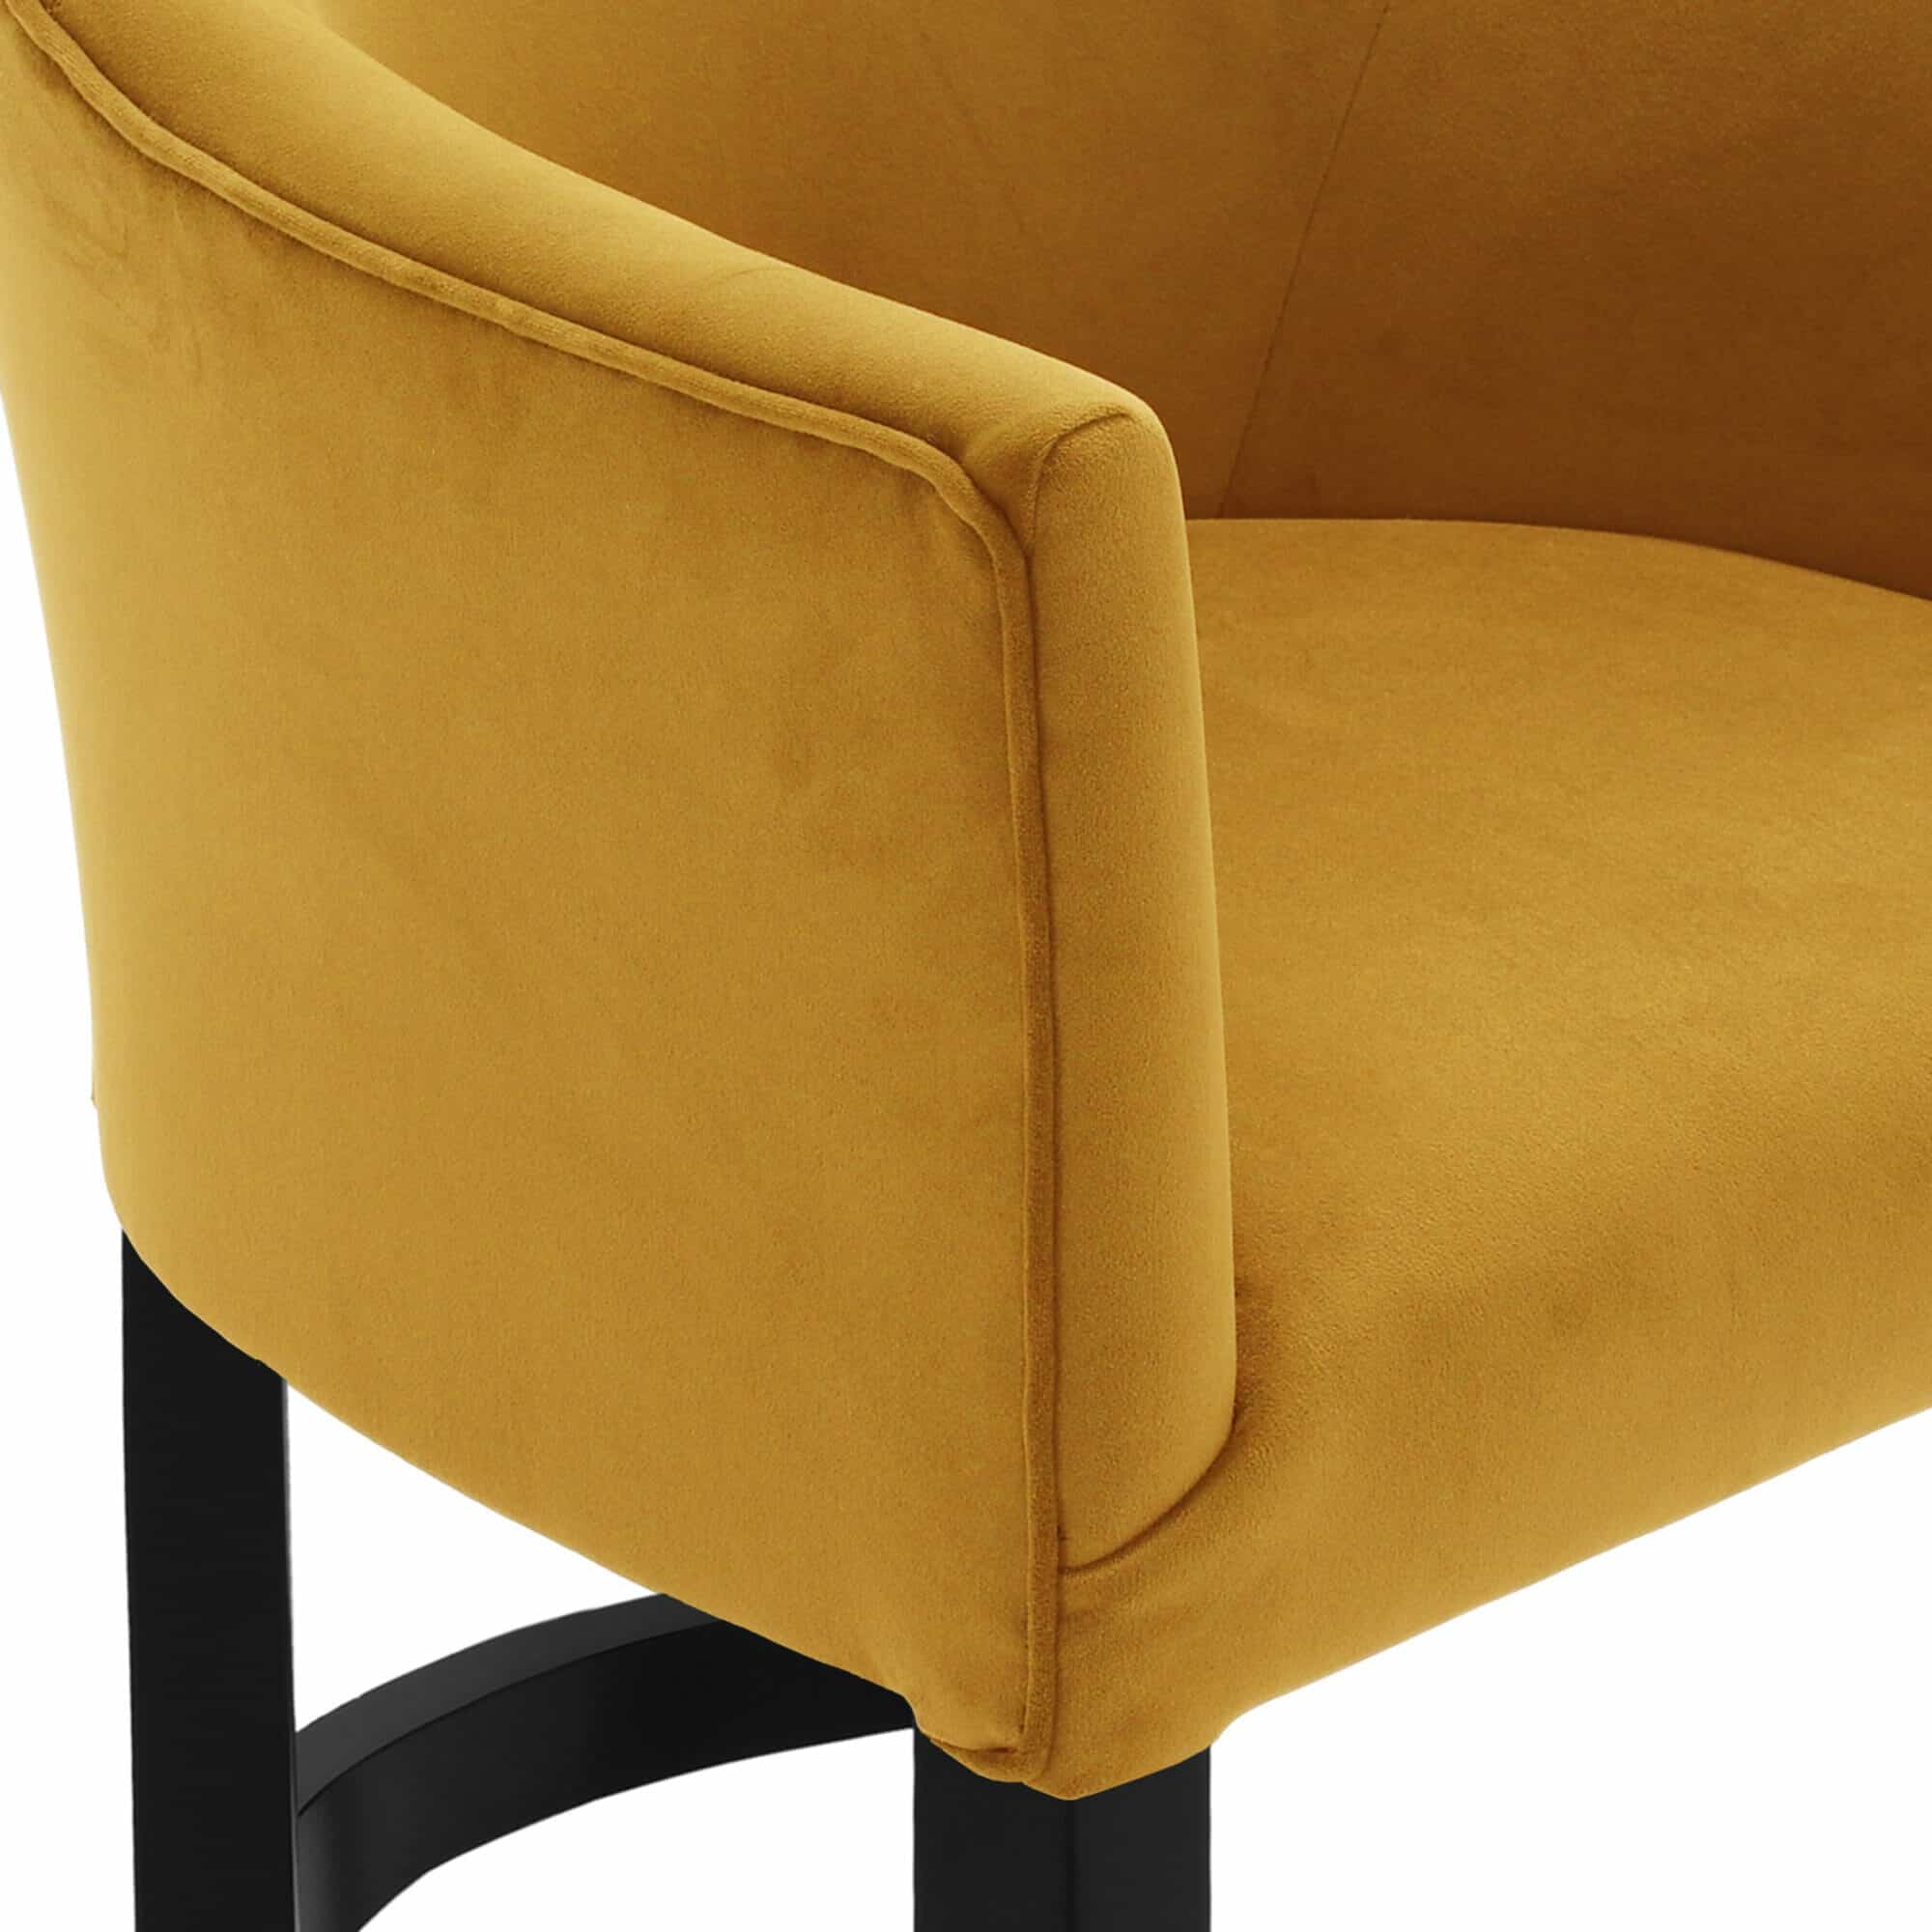 Huxley-Counter-Stool-with-Arms-by-Olson-and-Baker-Tumeric-Velvet-Black-Ash-Leg-Detail-01 Olson and Baker - Designer & Contemporary Sofas, Furniture - Olson and Baker showcases original designs from authentic, designer brands. Buy contemporary furniture, lighting, storage, sofas & chairs at Olson + Baker.